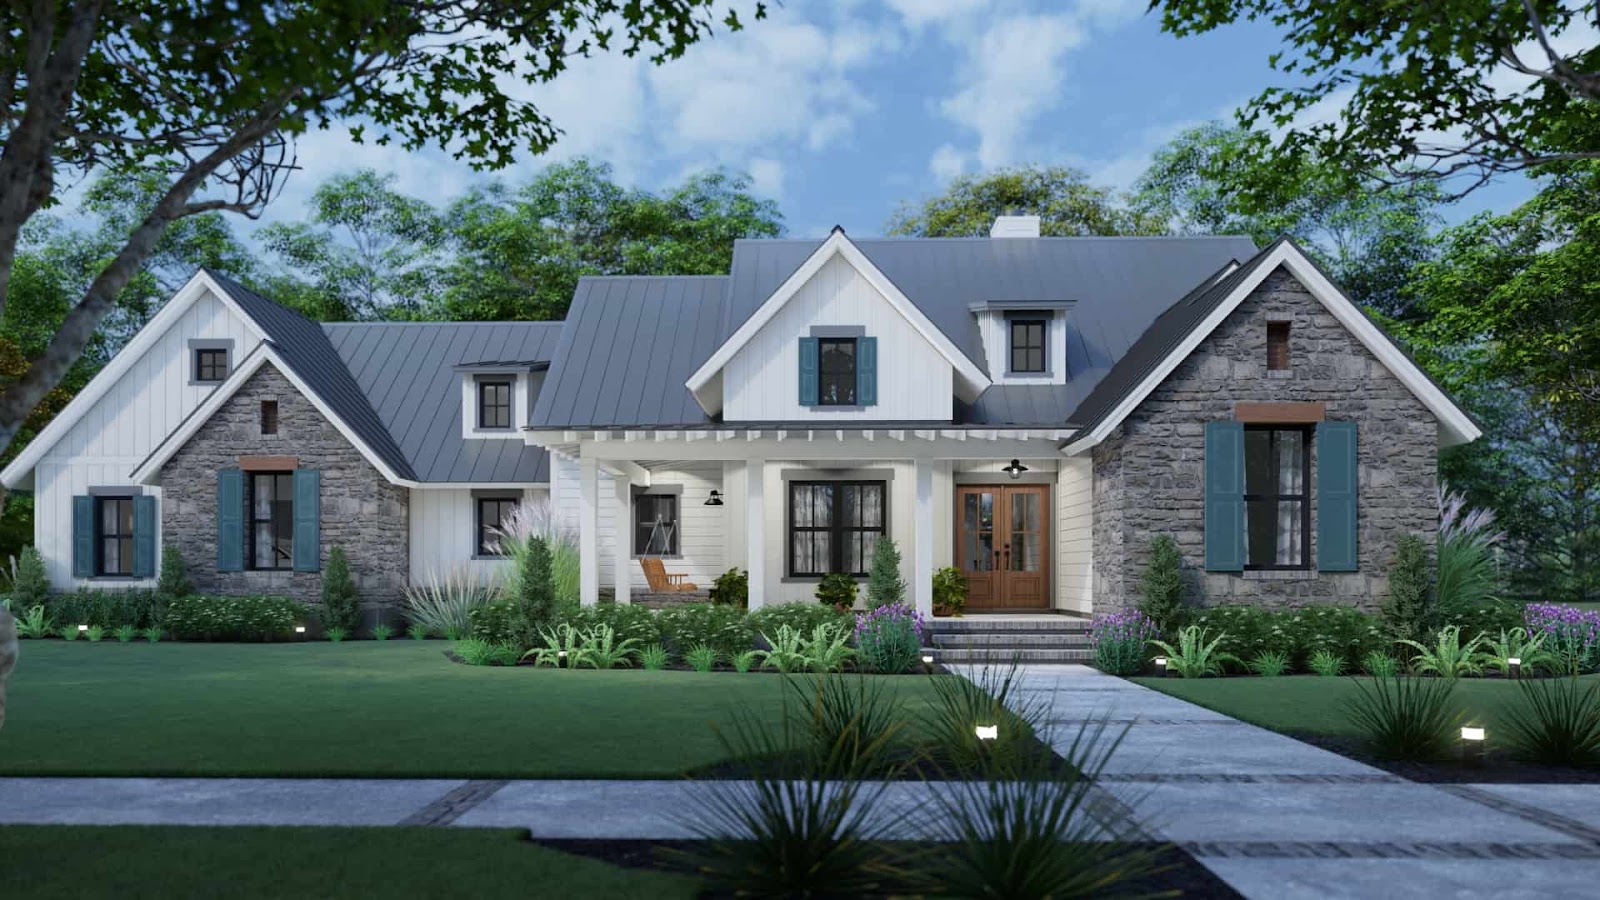 Stunning 3-bedroom modern farmhouse with 2.5 baths, a 2-car garage, and lovely front porch